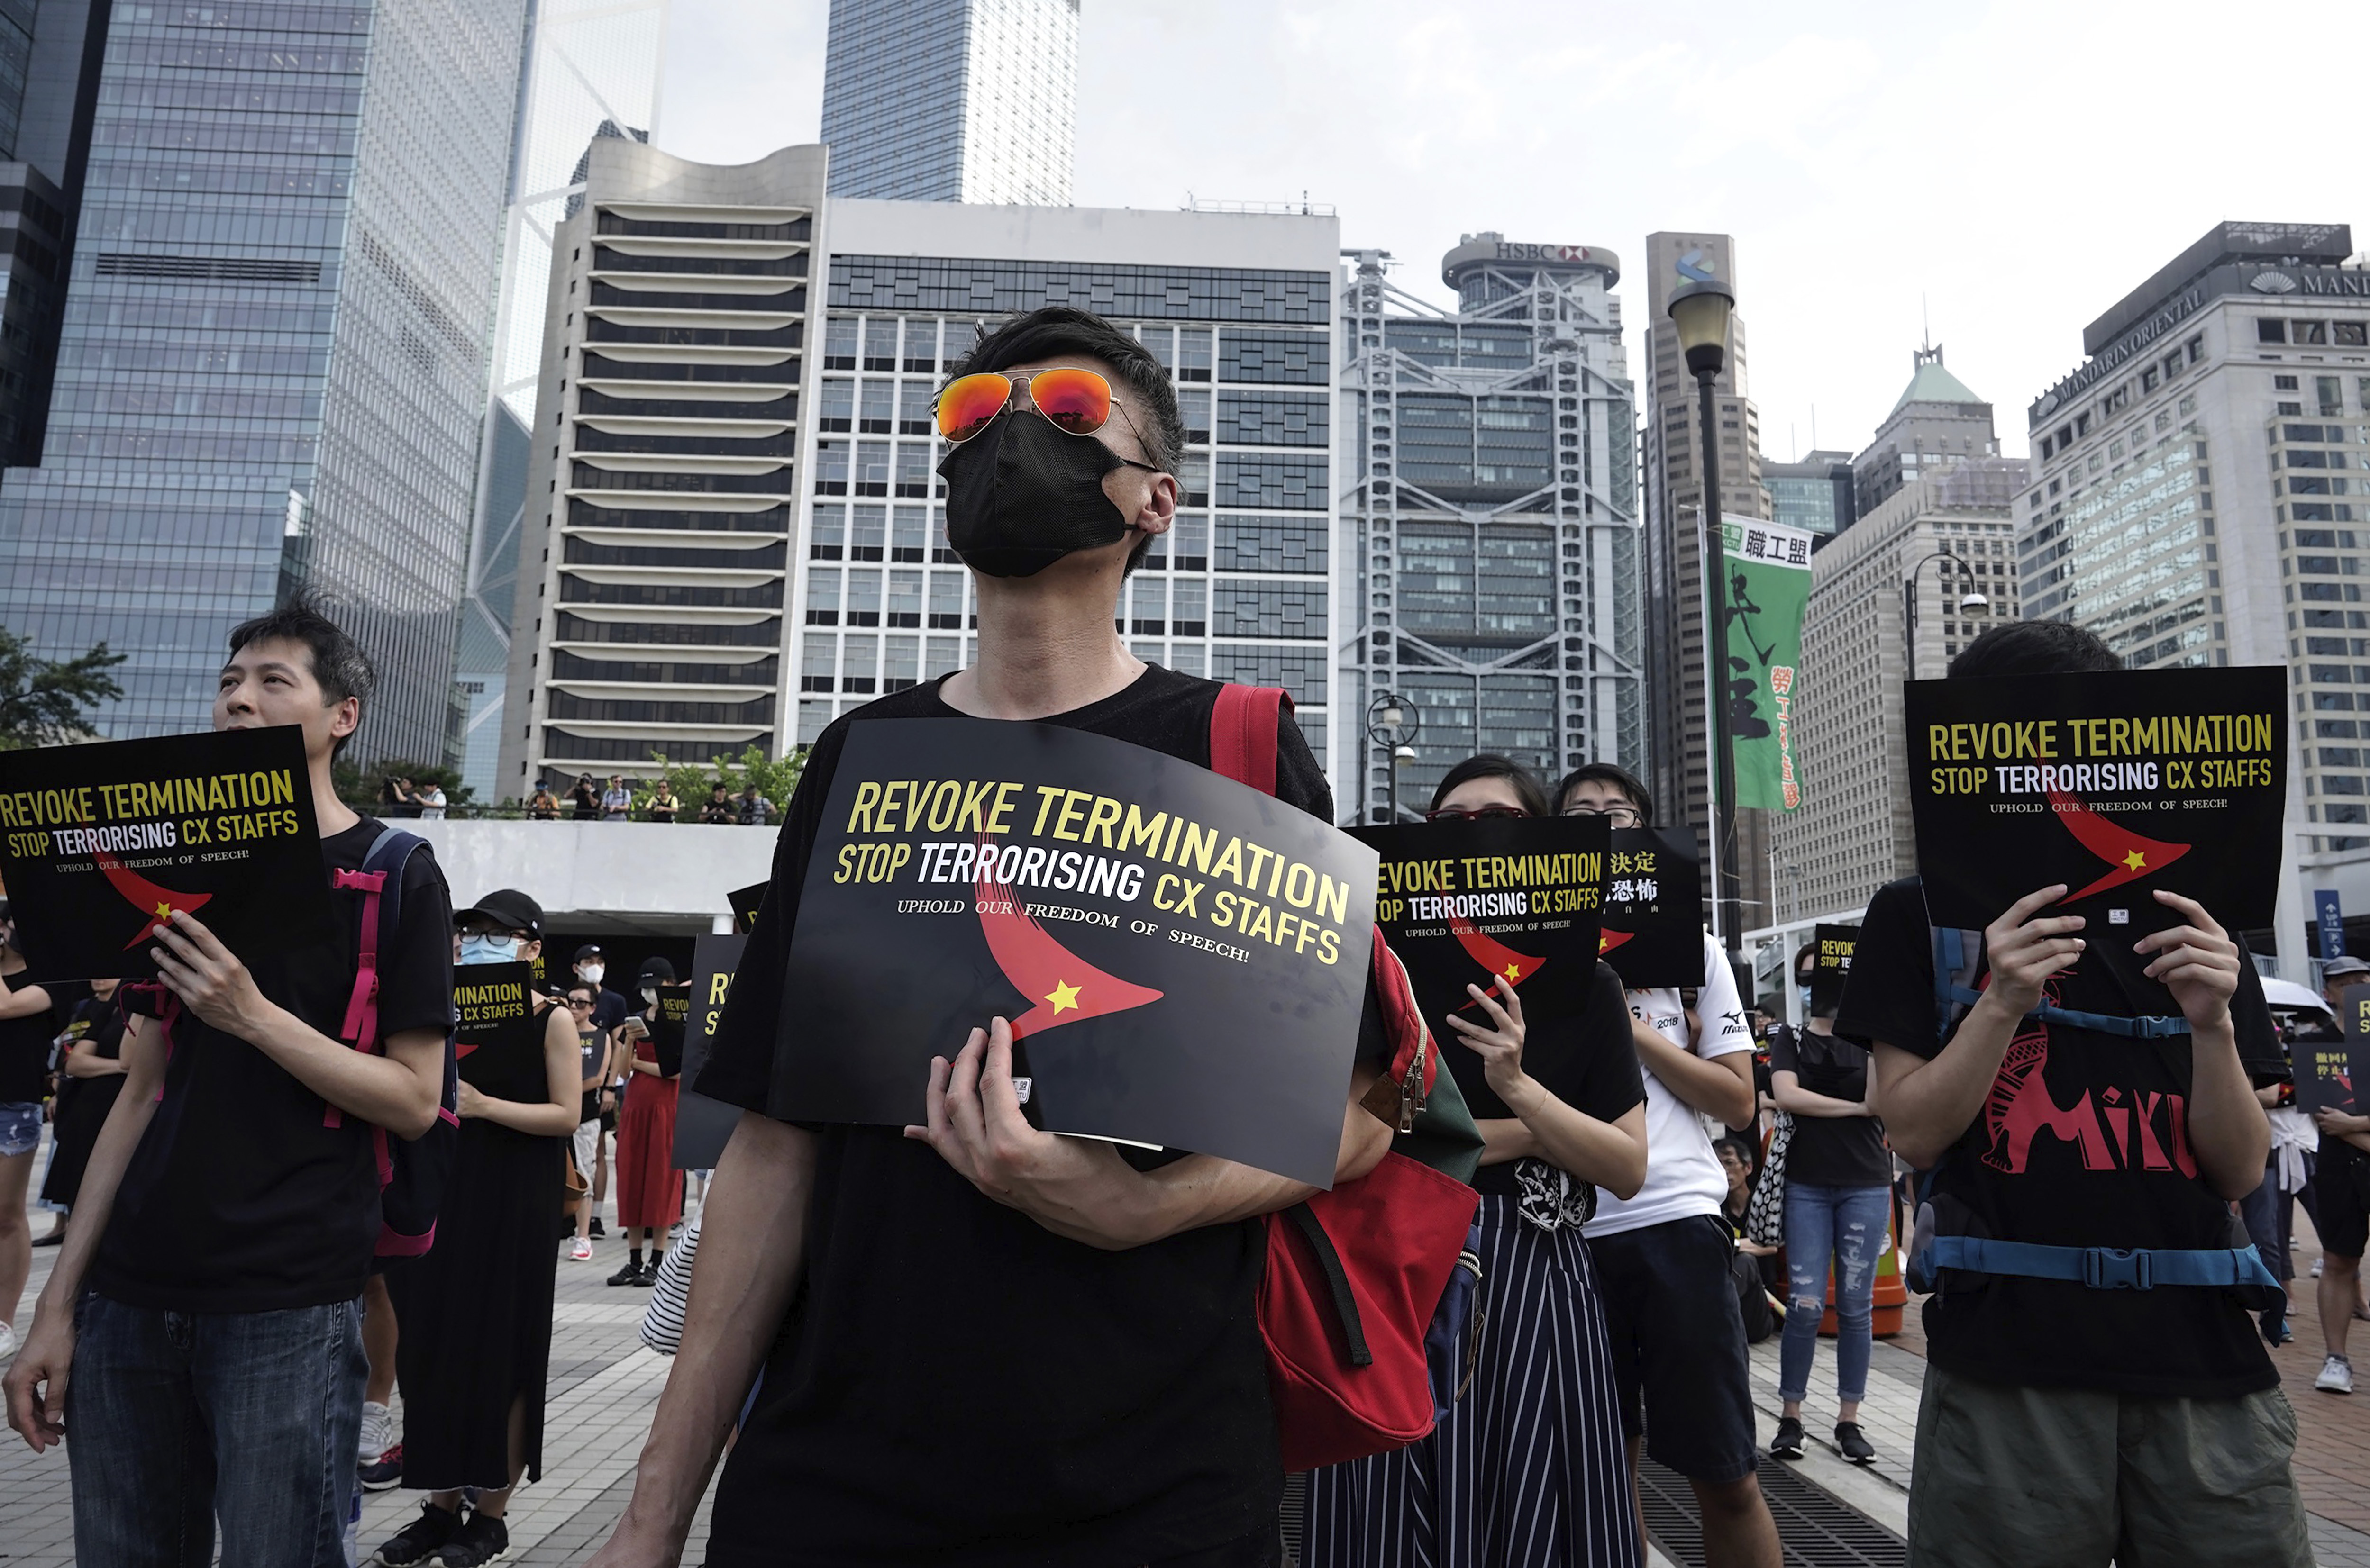 Unions target Cathay Pacific airline in Hong Kong protest